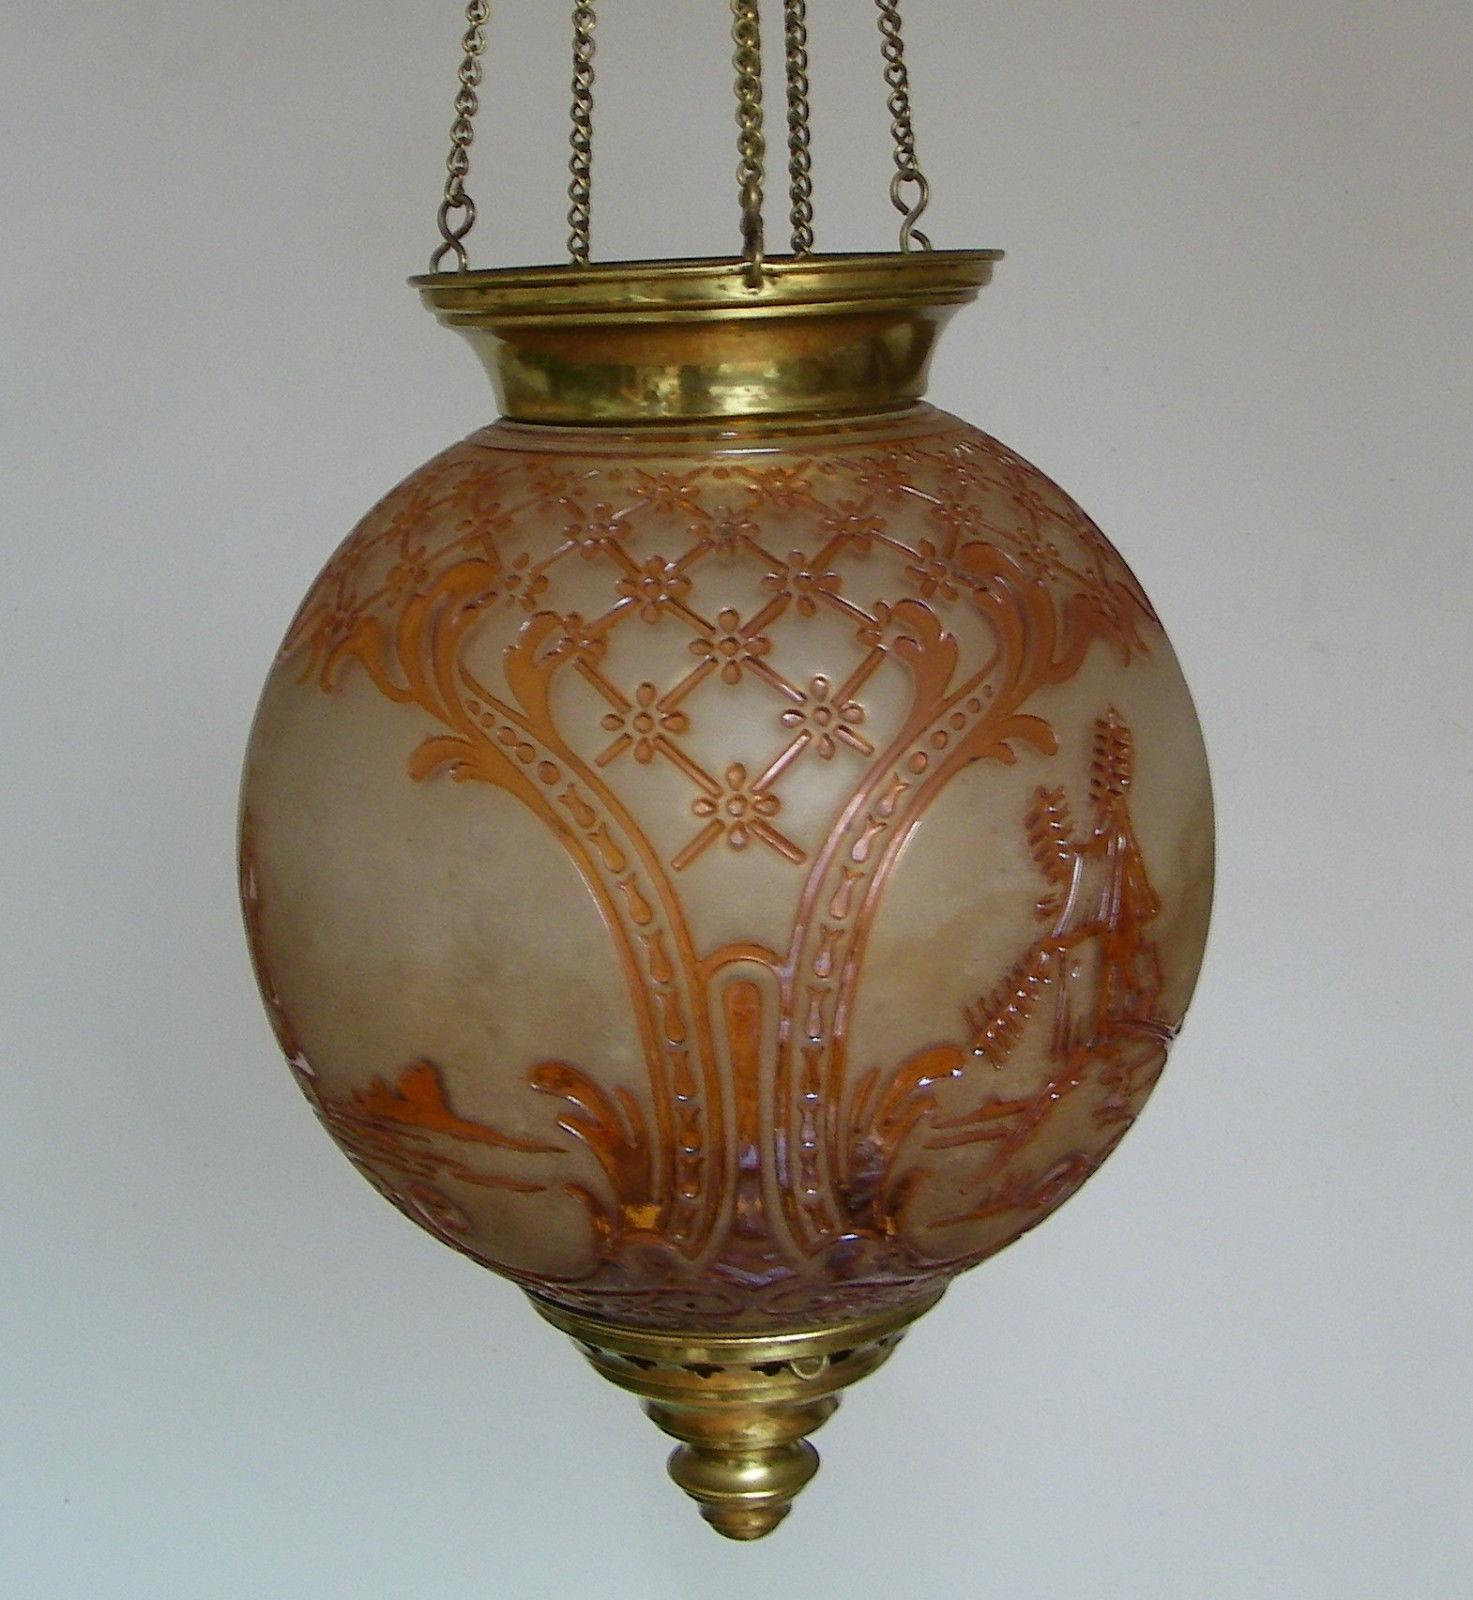 19thc French Napoleon III Crystal Hanging Lantern - Countryside Scenes -Baccarat In Good Condition For Sale In Opa Locka, FL